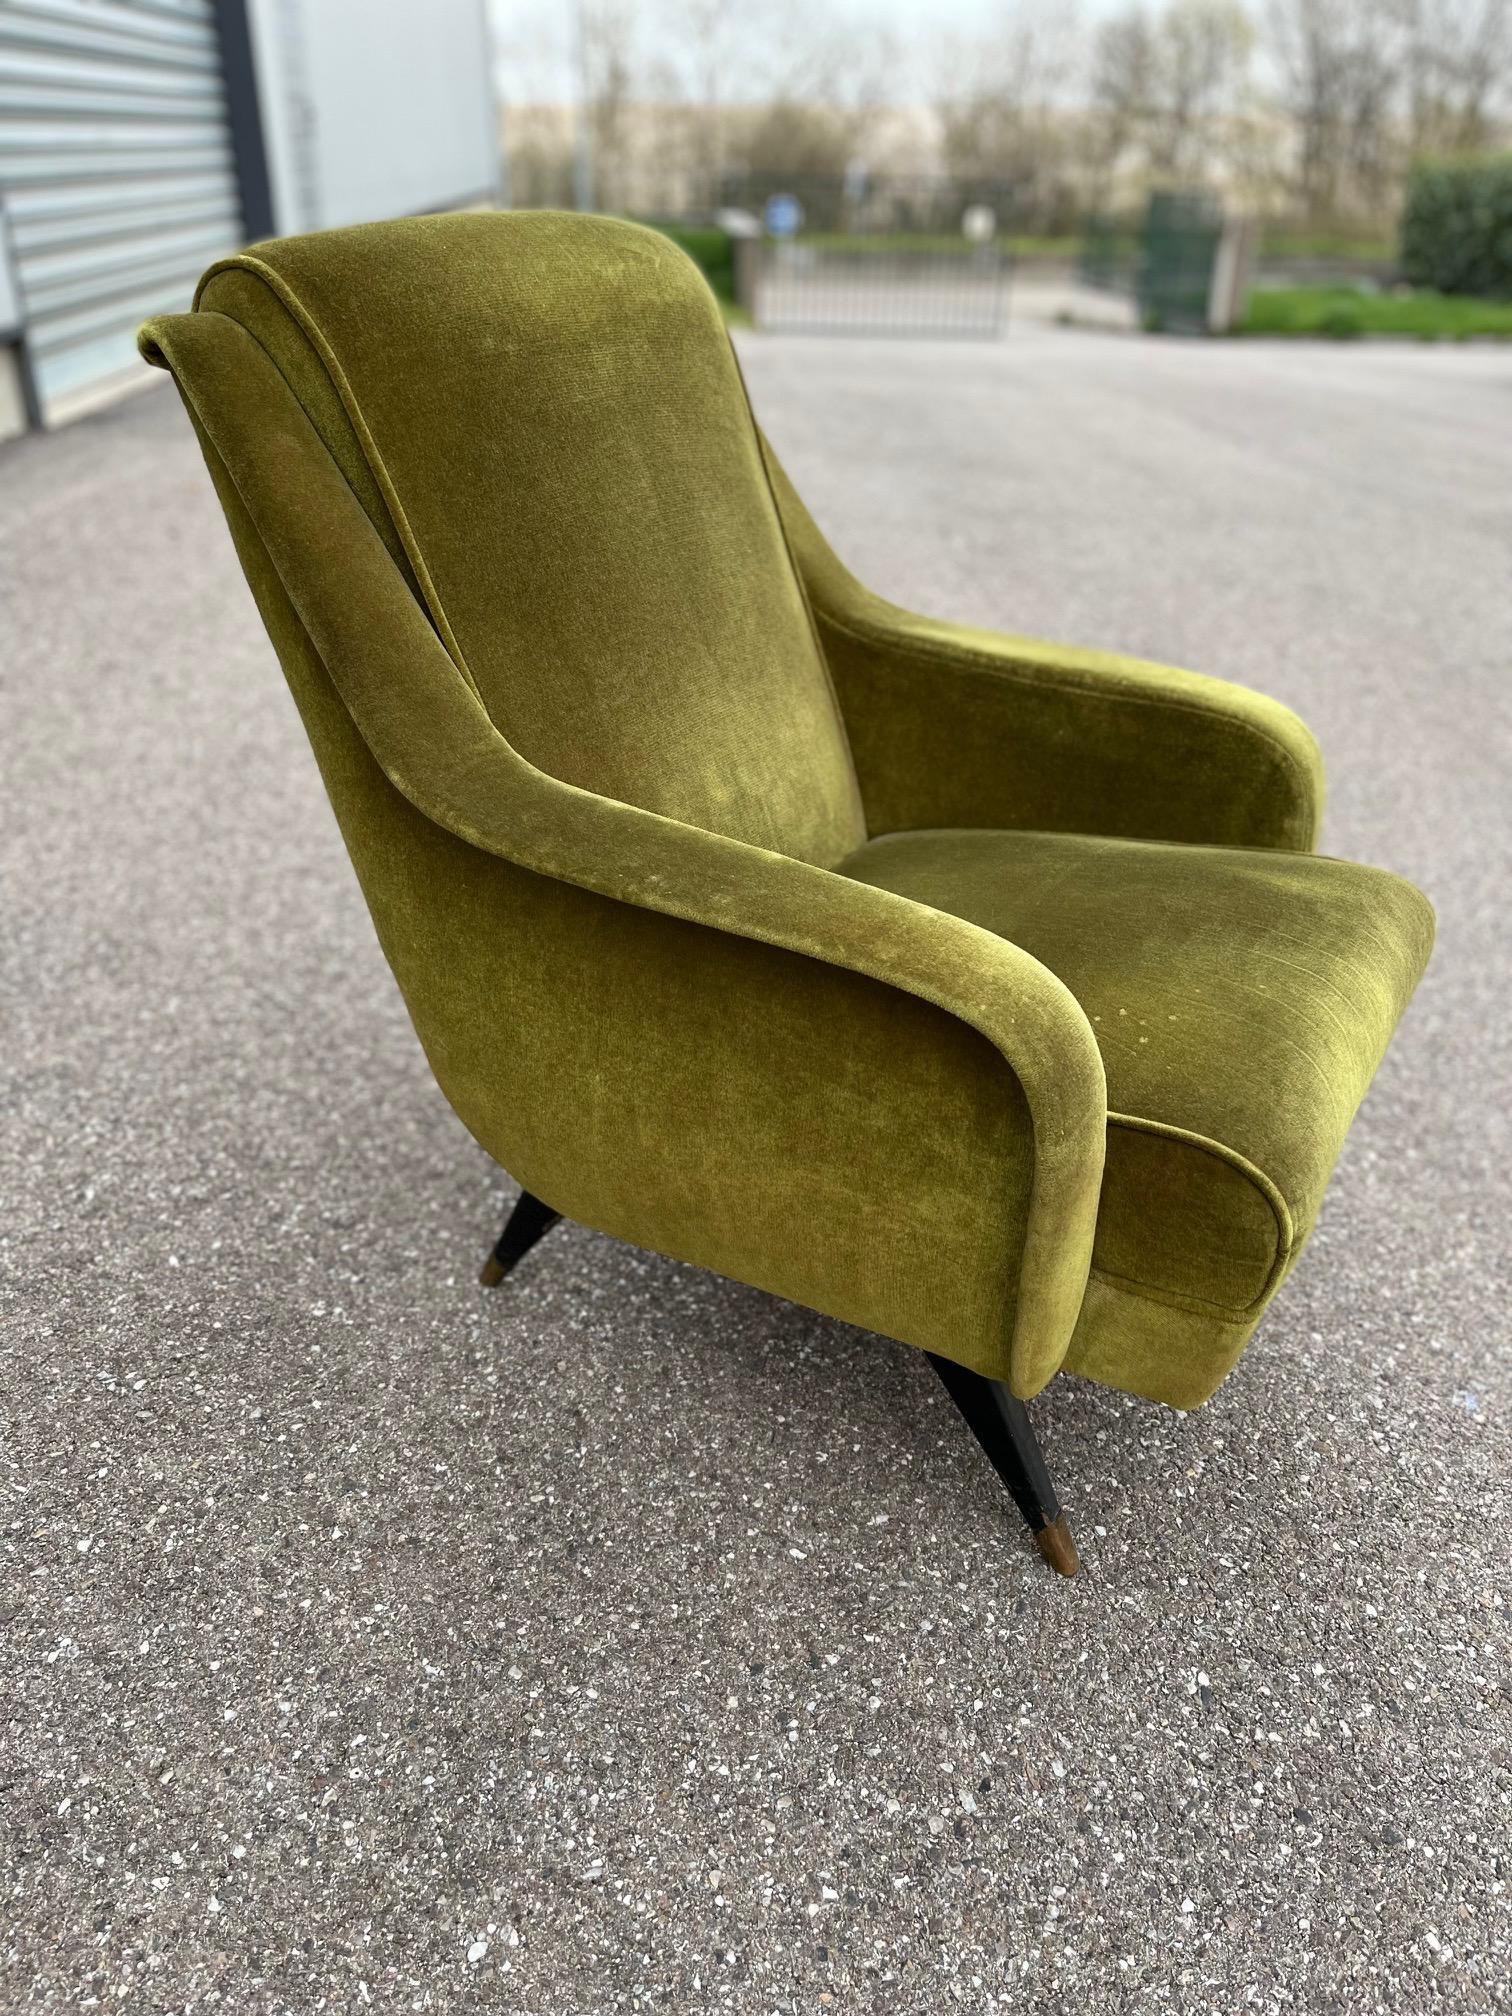 beautiful armchair edited by Erton in the 1950's, all original condition.